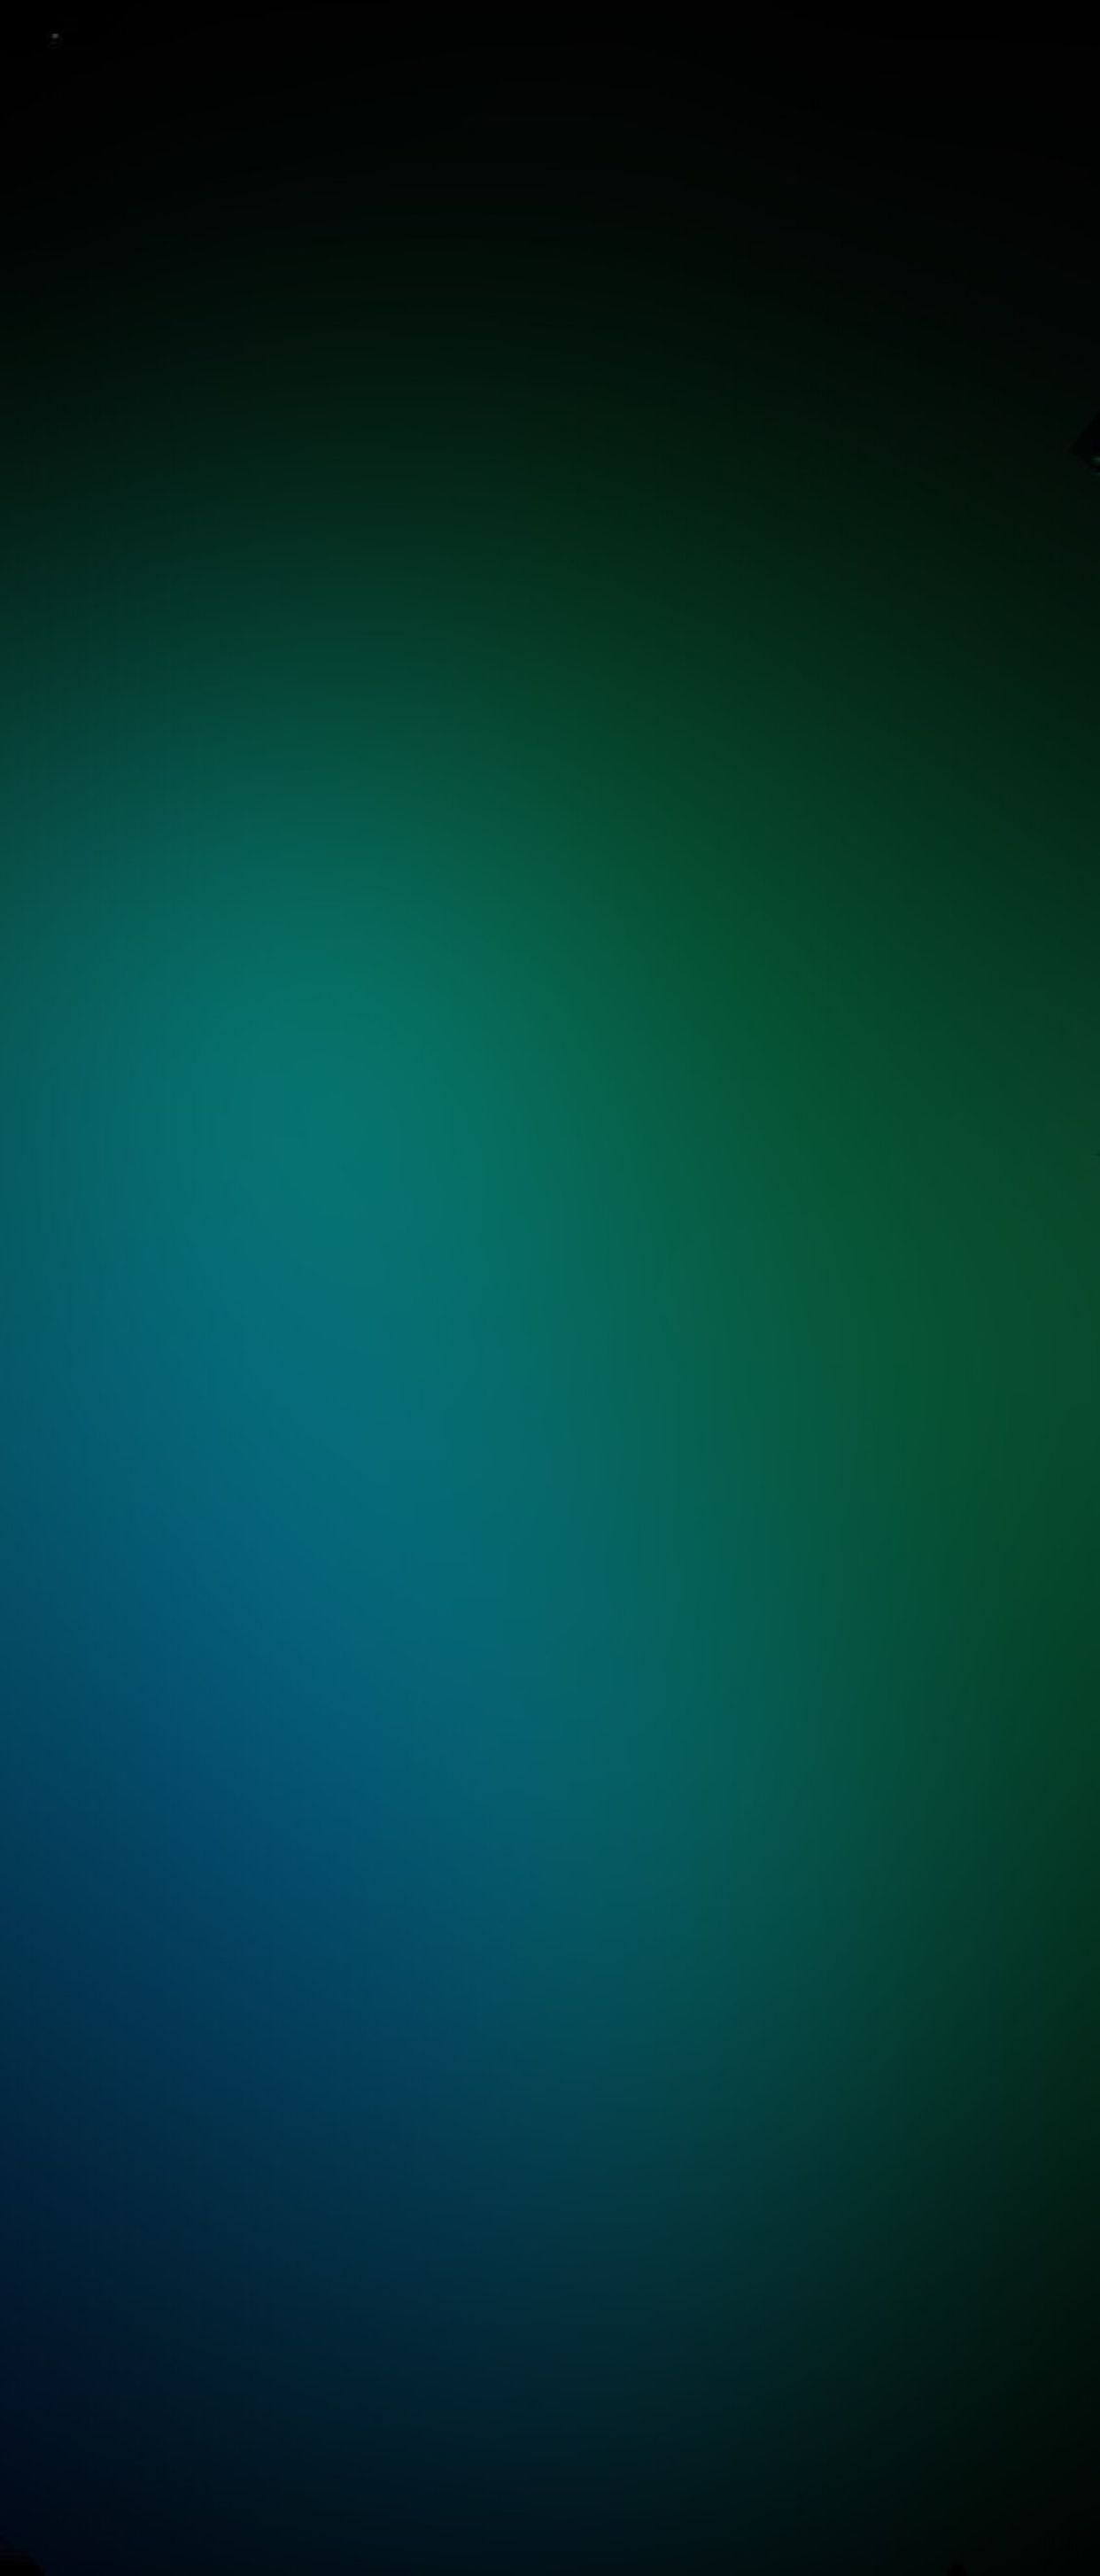 Blue Green and Black Wallpapers on WallpaperDog